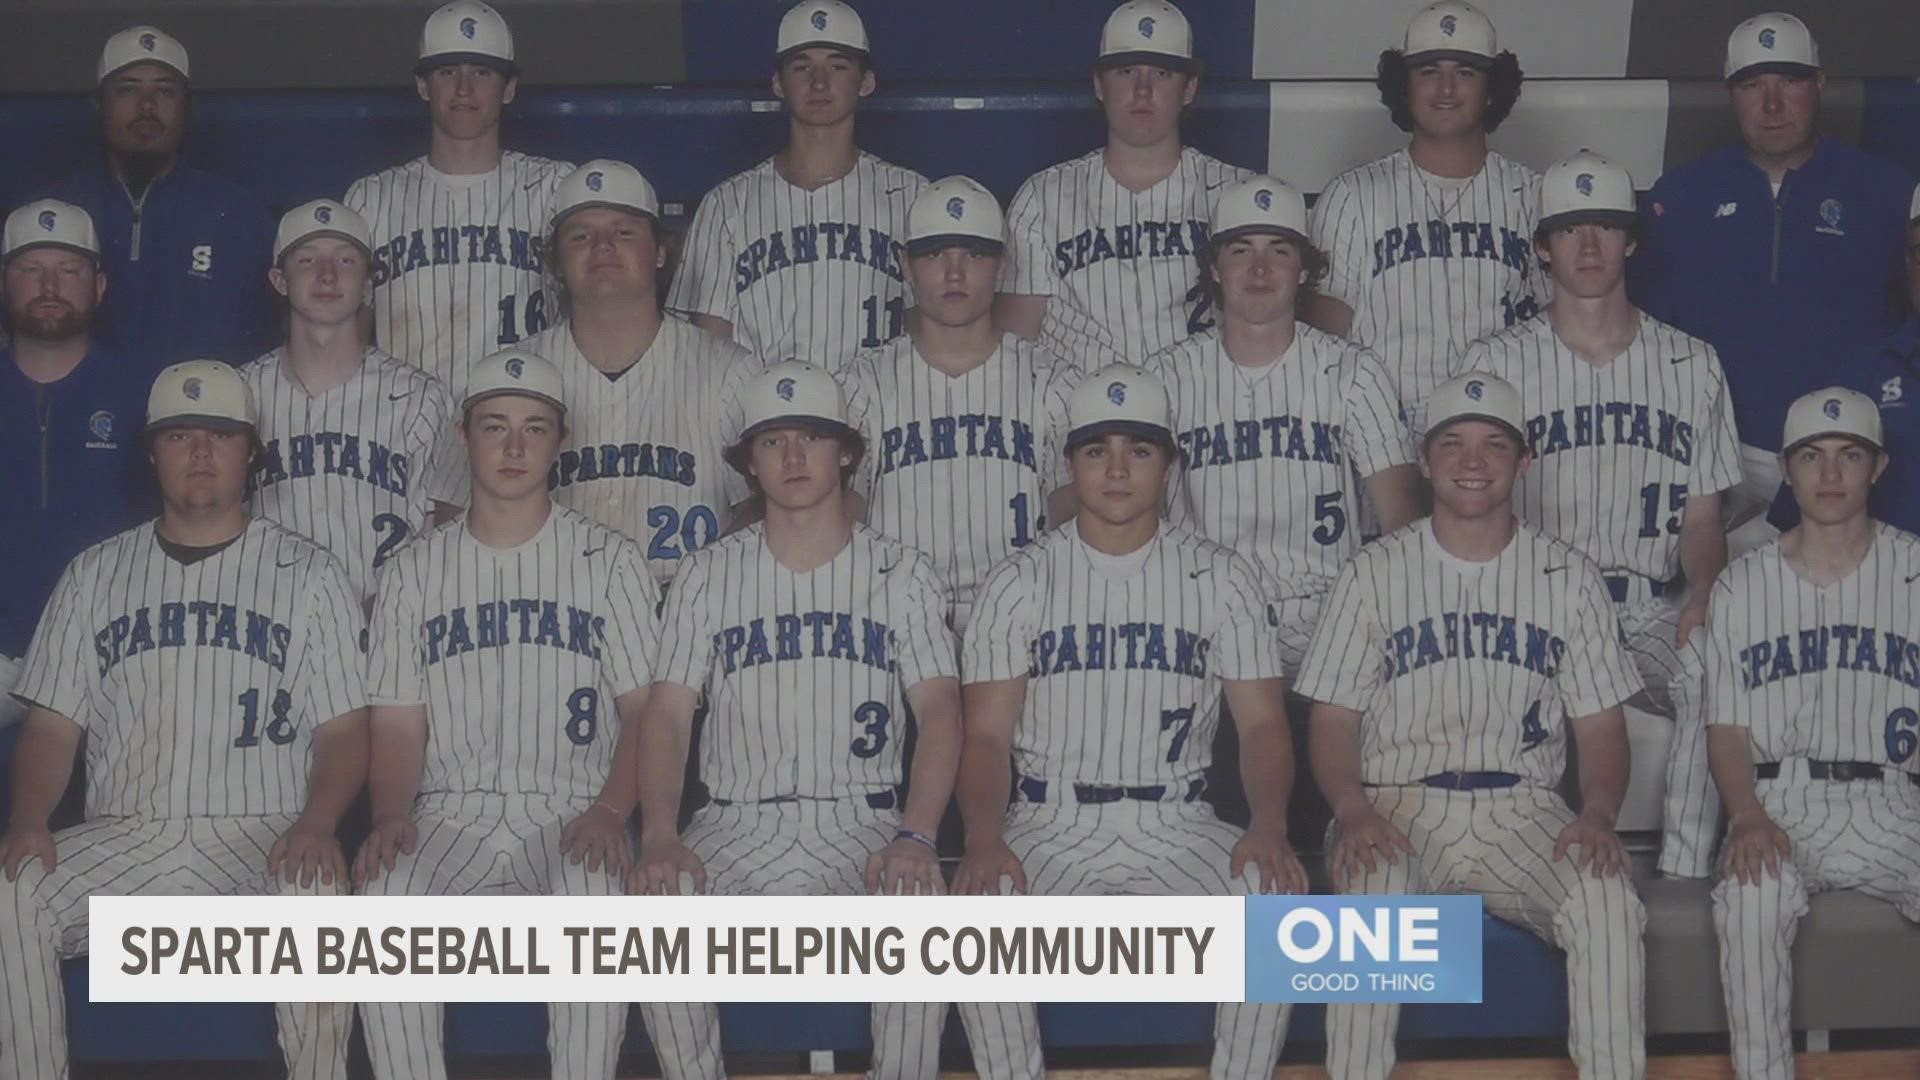 Baseball season is still months away, but Sparta High School's baseball players are already hard at work, trying to address a rising need in their community.